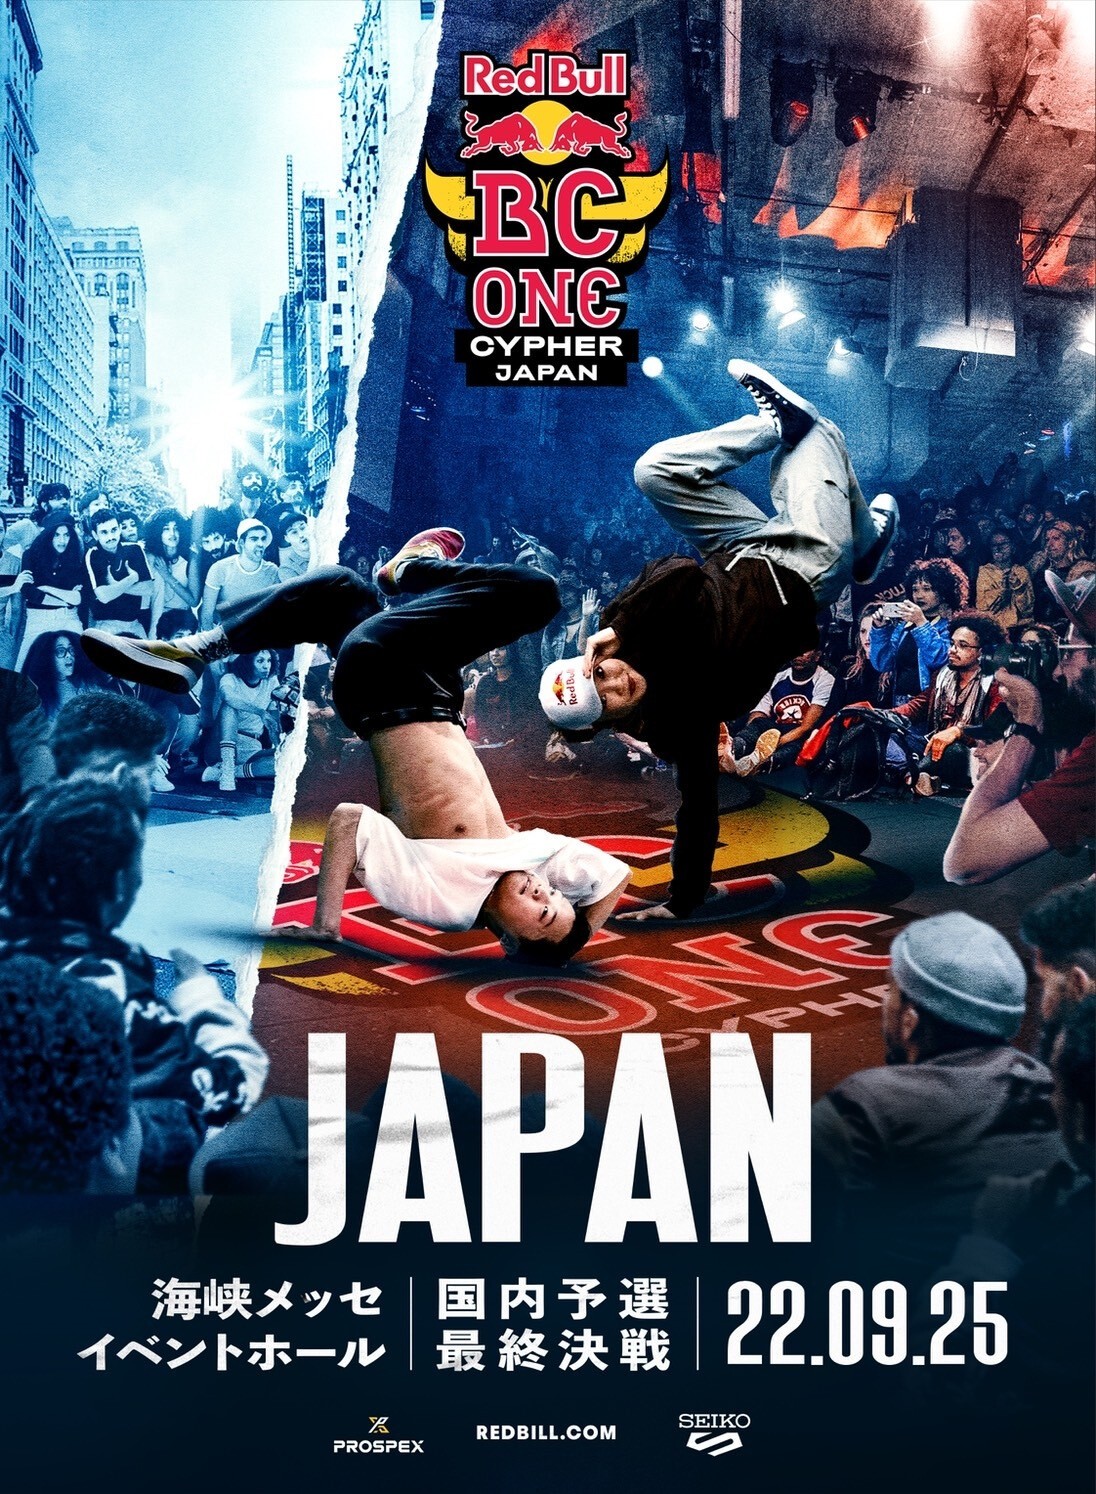 Red Bull One Cypher Japan 22 Zaiko